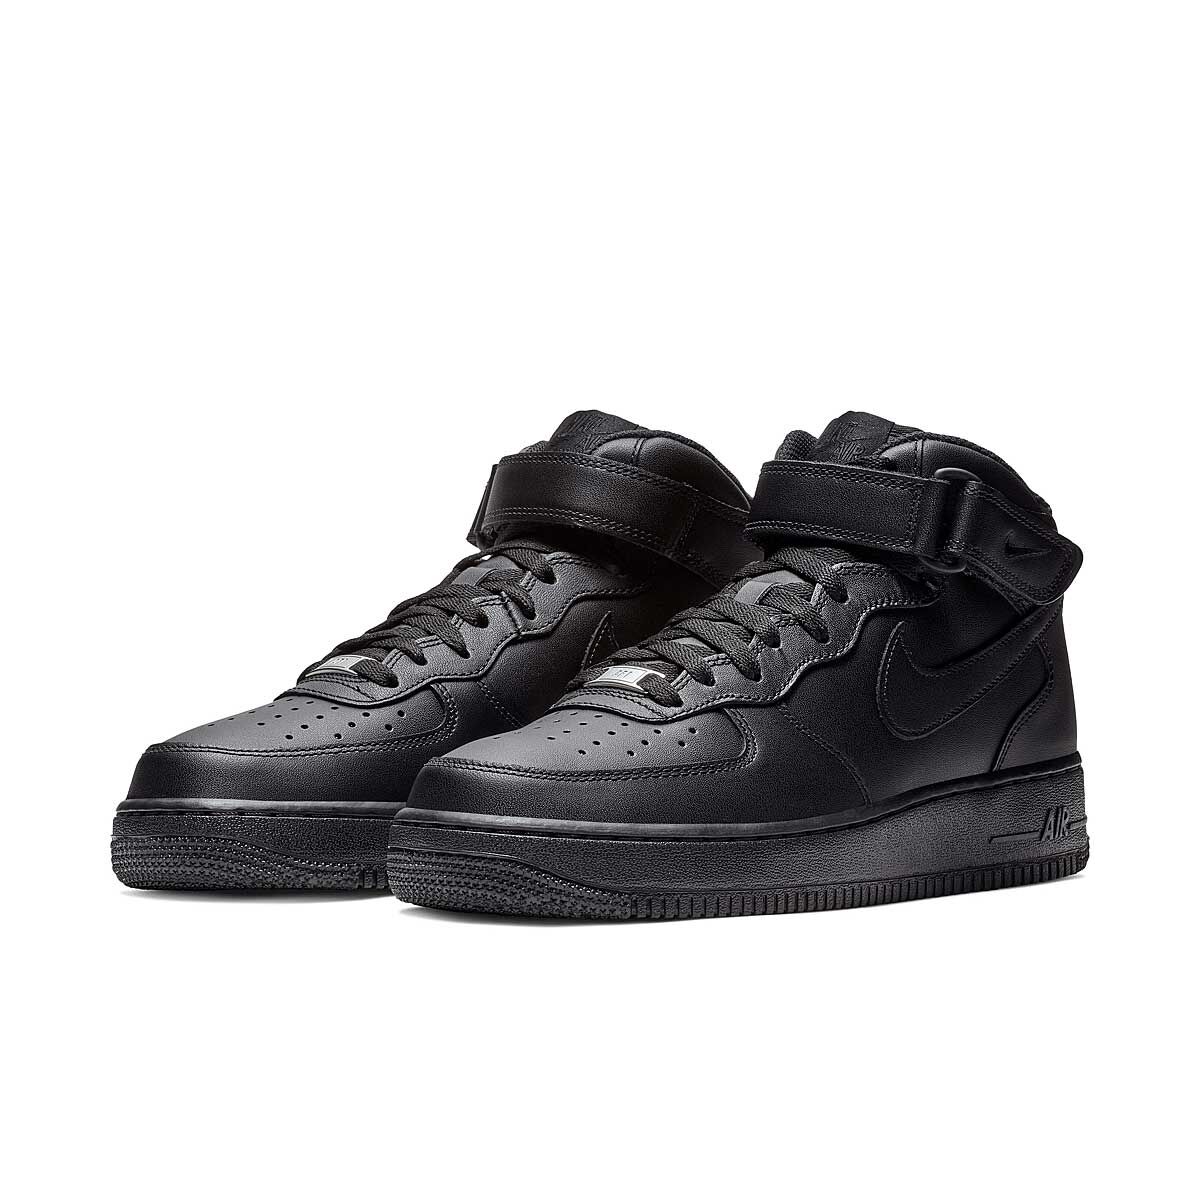 🏀 Get the Nike Air Force 1 Mid 07 in black | KICKZ